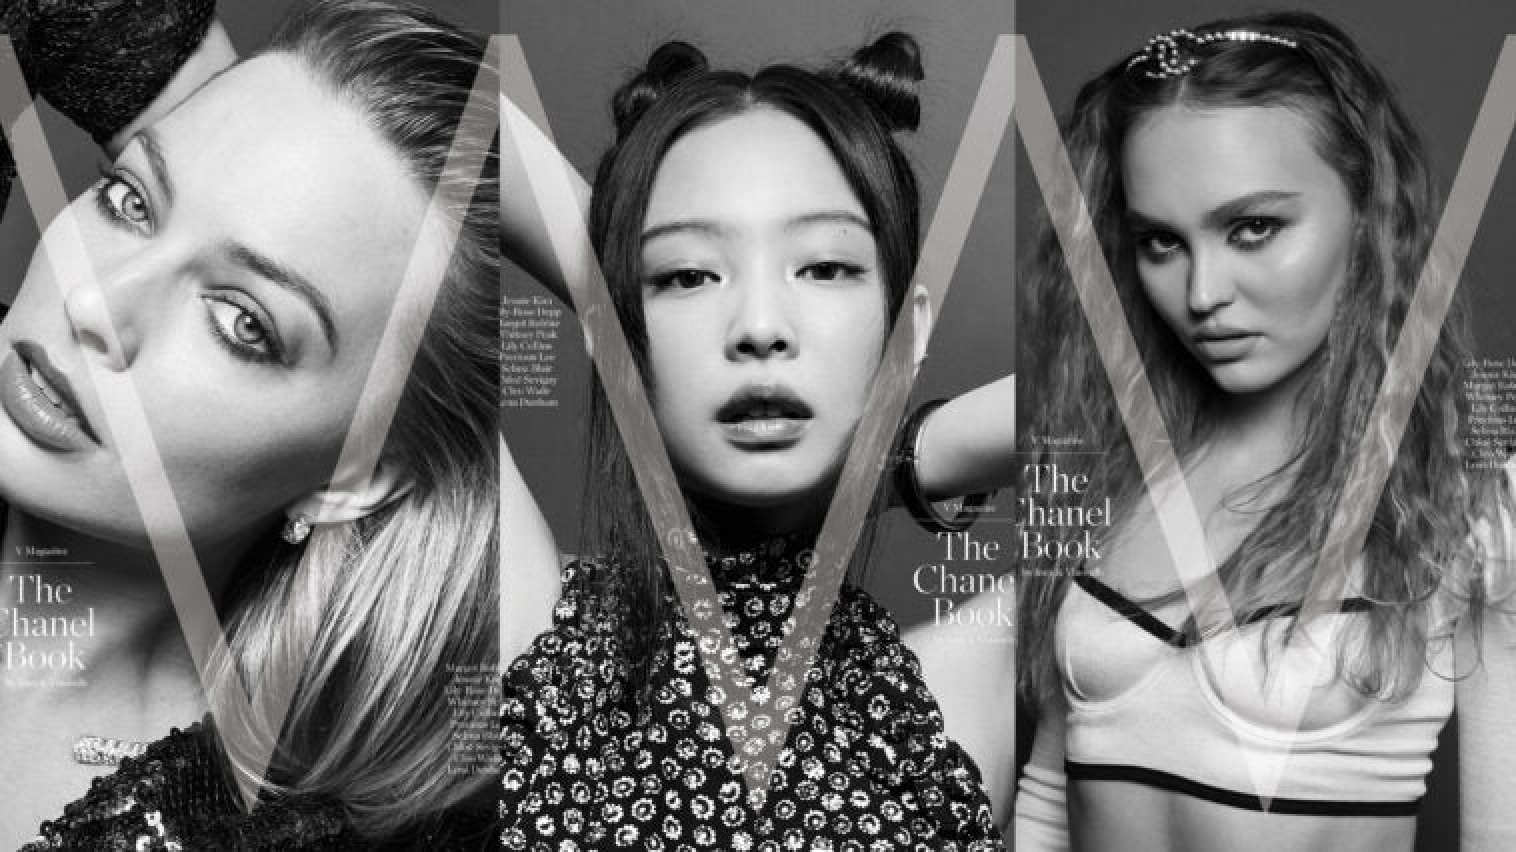 Margot Robbie, Jennie and Lily-Rose Depp in a V Magazine Chanel book. Photo: Atelier New York